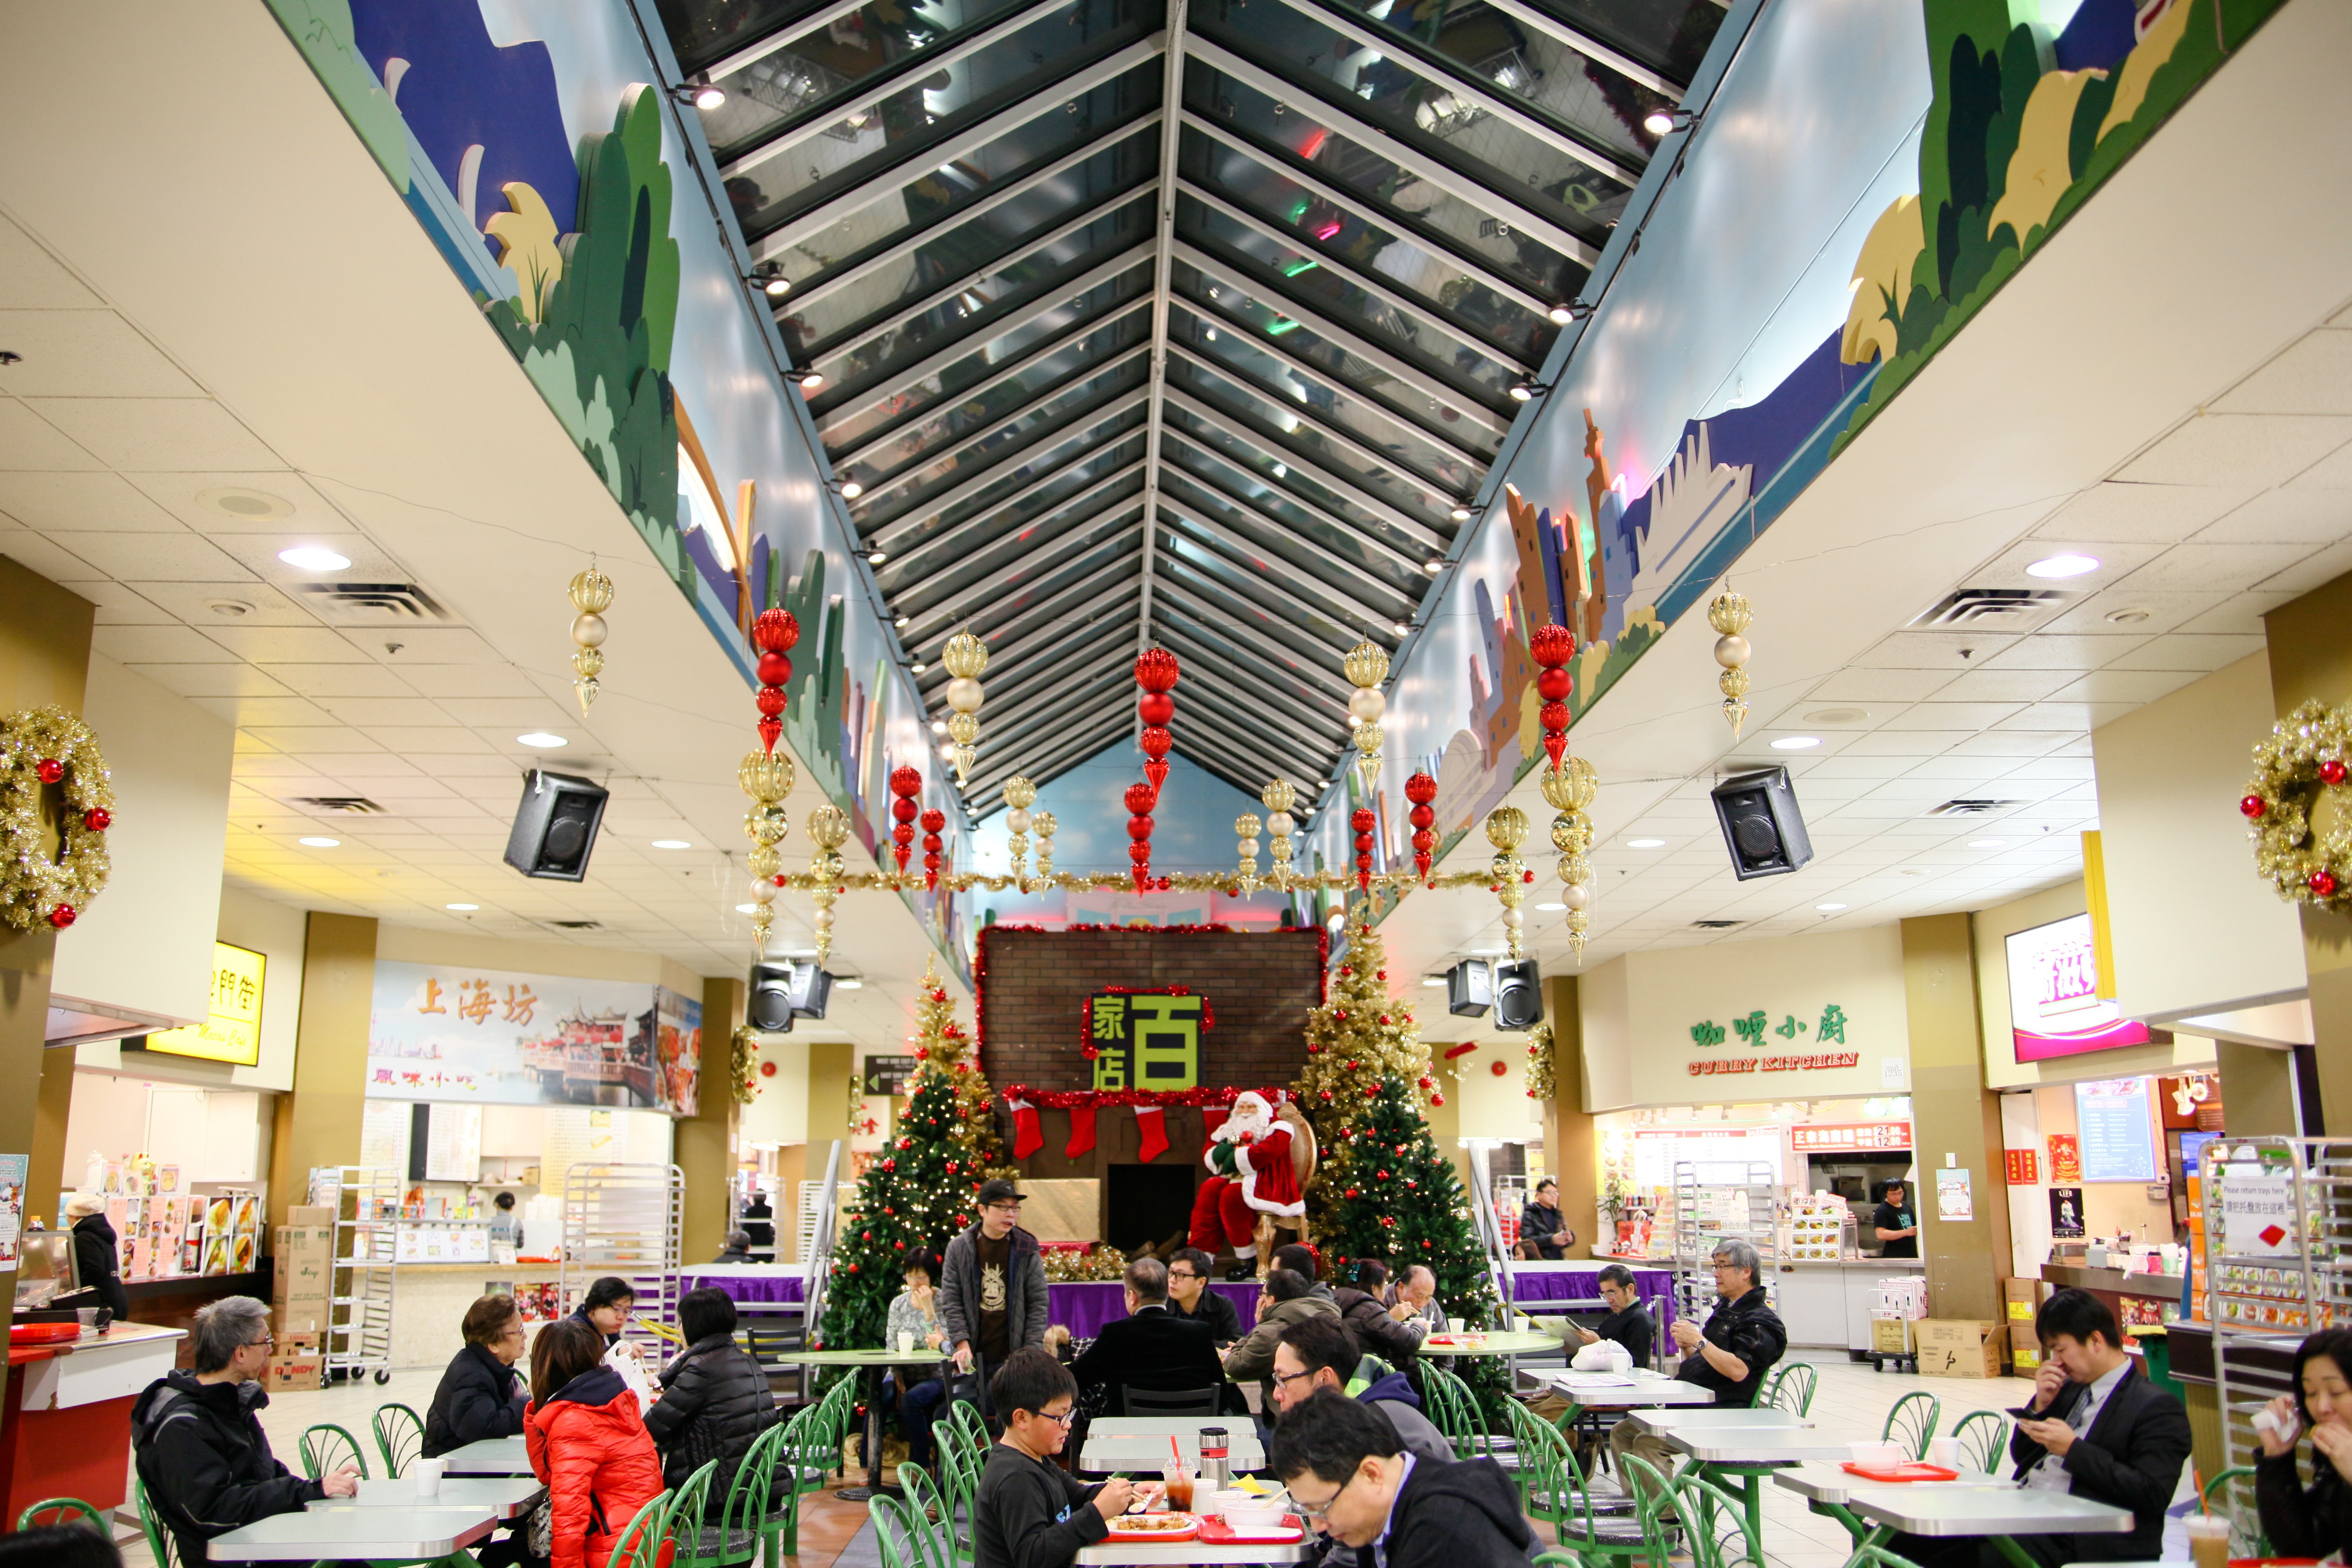 A food court at Parker Place Mall in Richmond, BC — one of the region’s first Chinese malls — is decorated for Christmas with gold wreaths, gold and red icicle baubles and Santa Claus on a purple riser in the background. In the foreground are people seated at tables, resting or eating lunch.